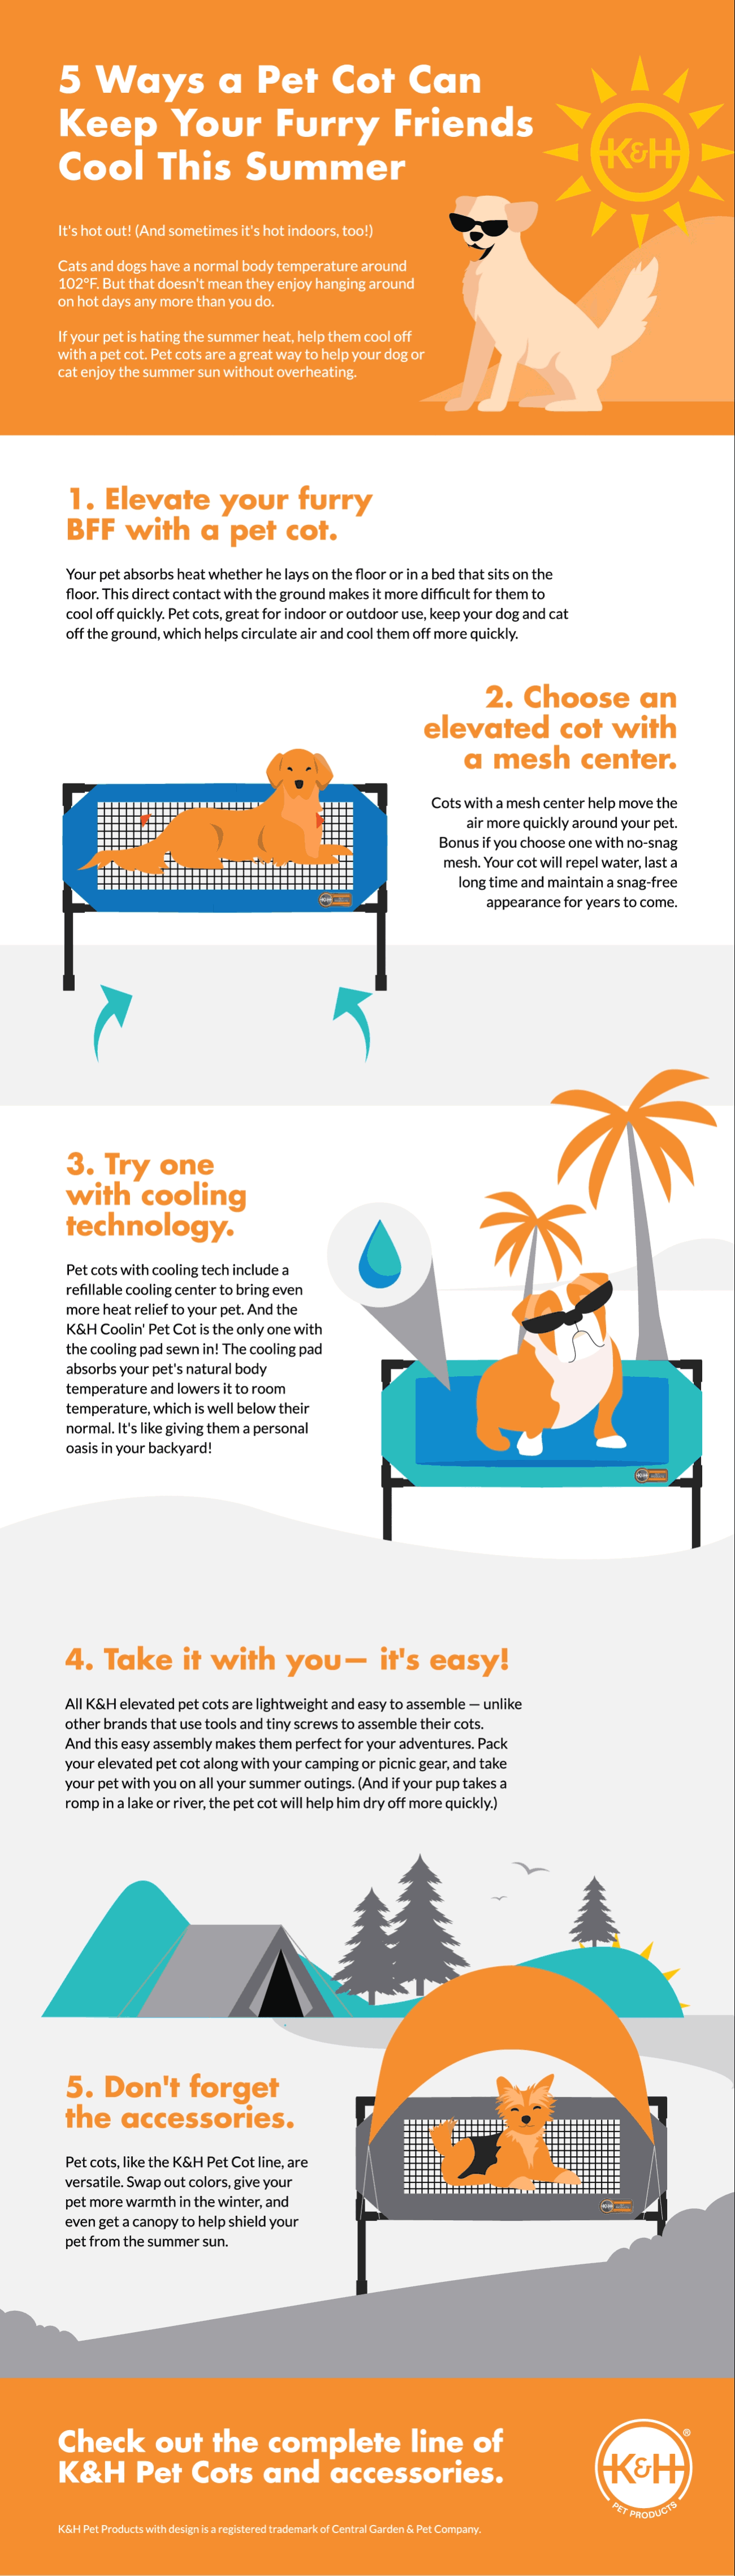 5 Ways A Pet Cot Can Keep Your Furry Friends Cool This Summer (Infographic)